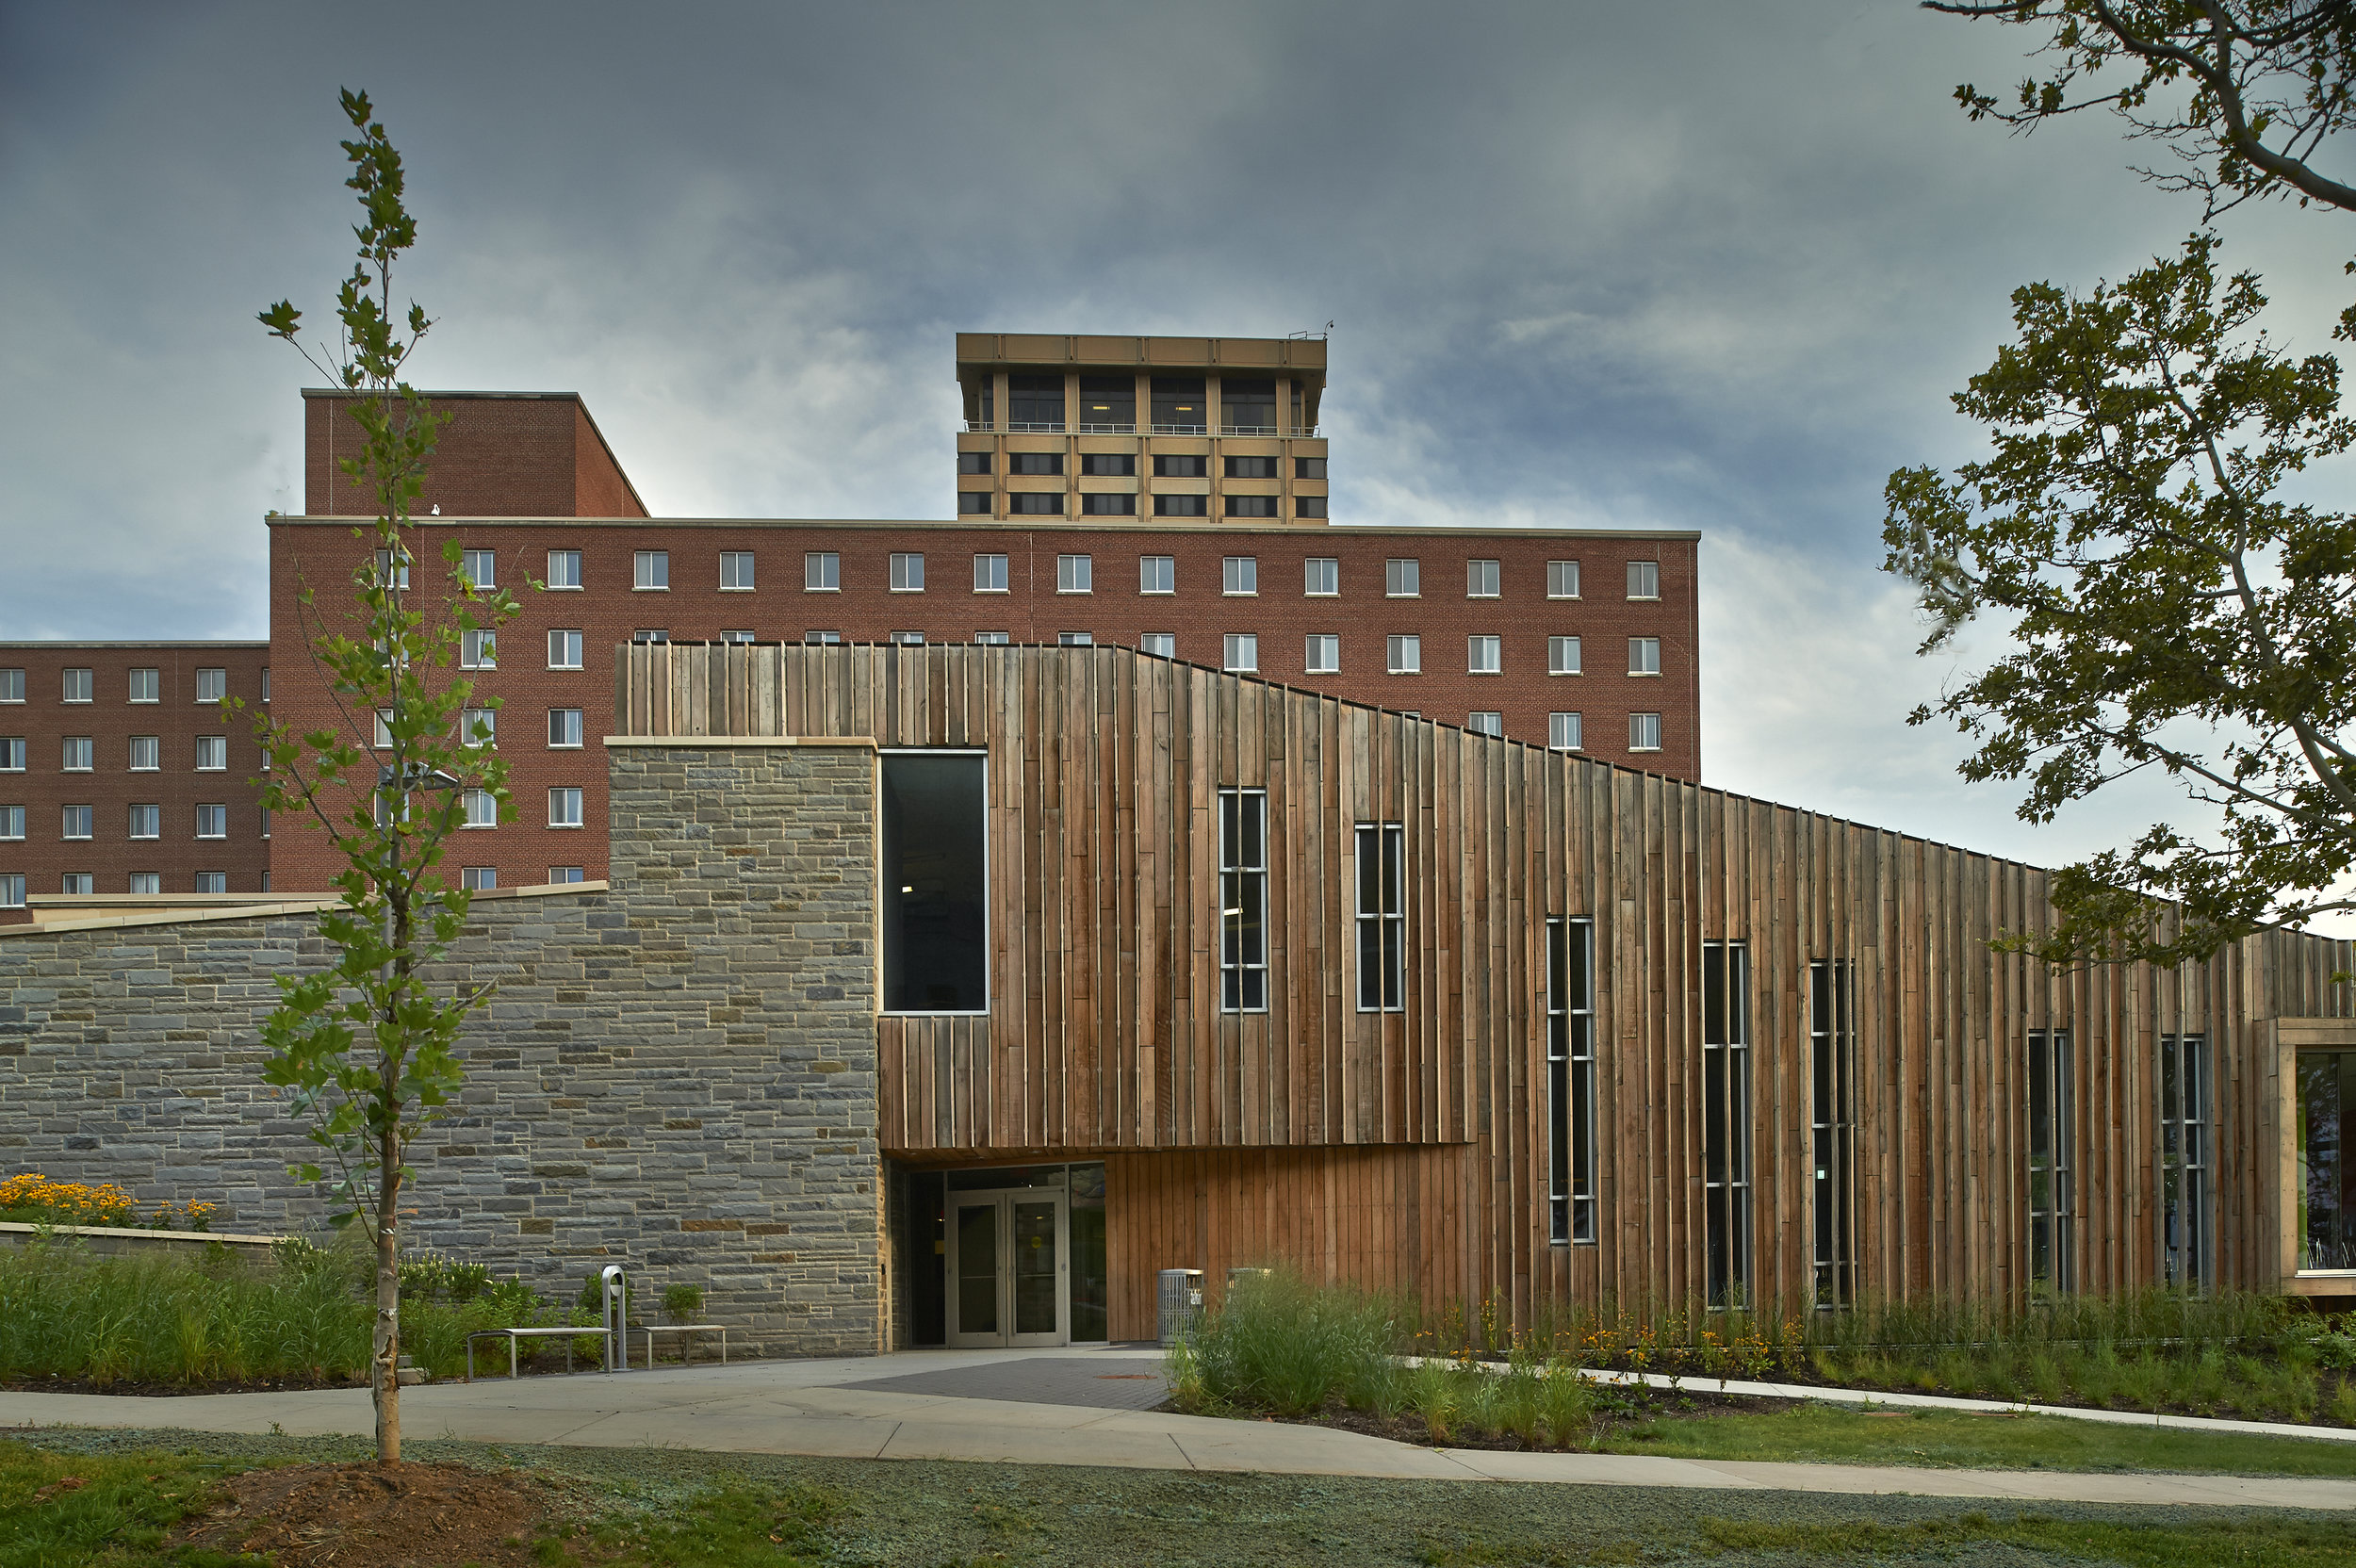 SADLER DINING HALL &lt;strong&gt;Sustainable use of common building materials and explorations in micro-comfort zones. IE a place for each person's climate preference.&lt;/strong&gt;